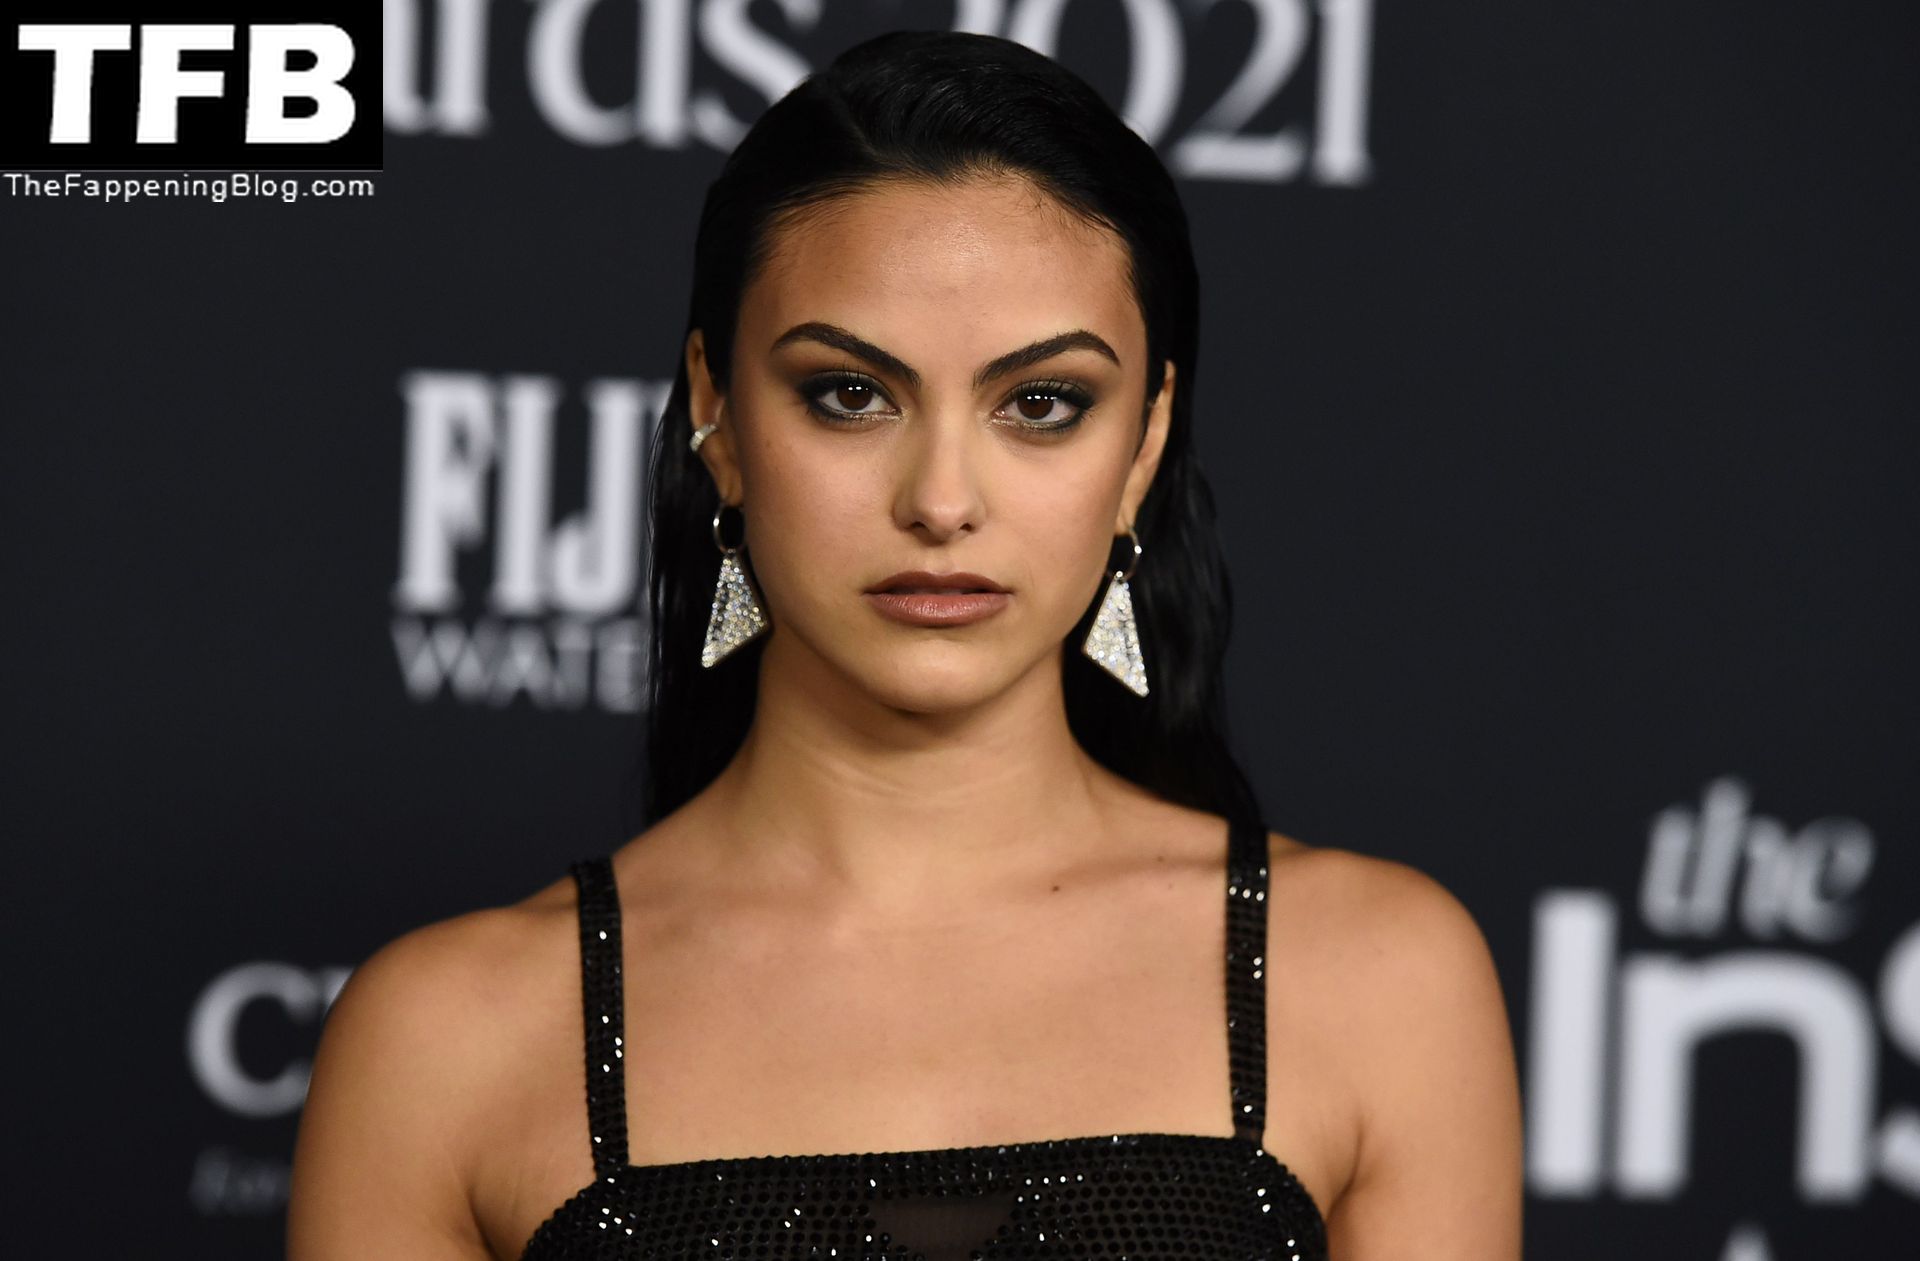 Camila-Mendes-See-Through-Tits-The-Fappening-Blog-77.jpg